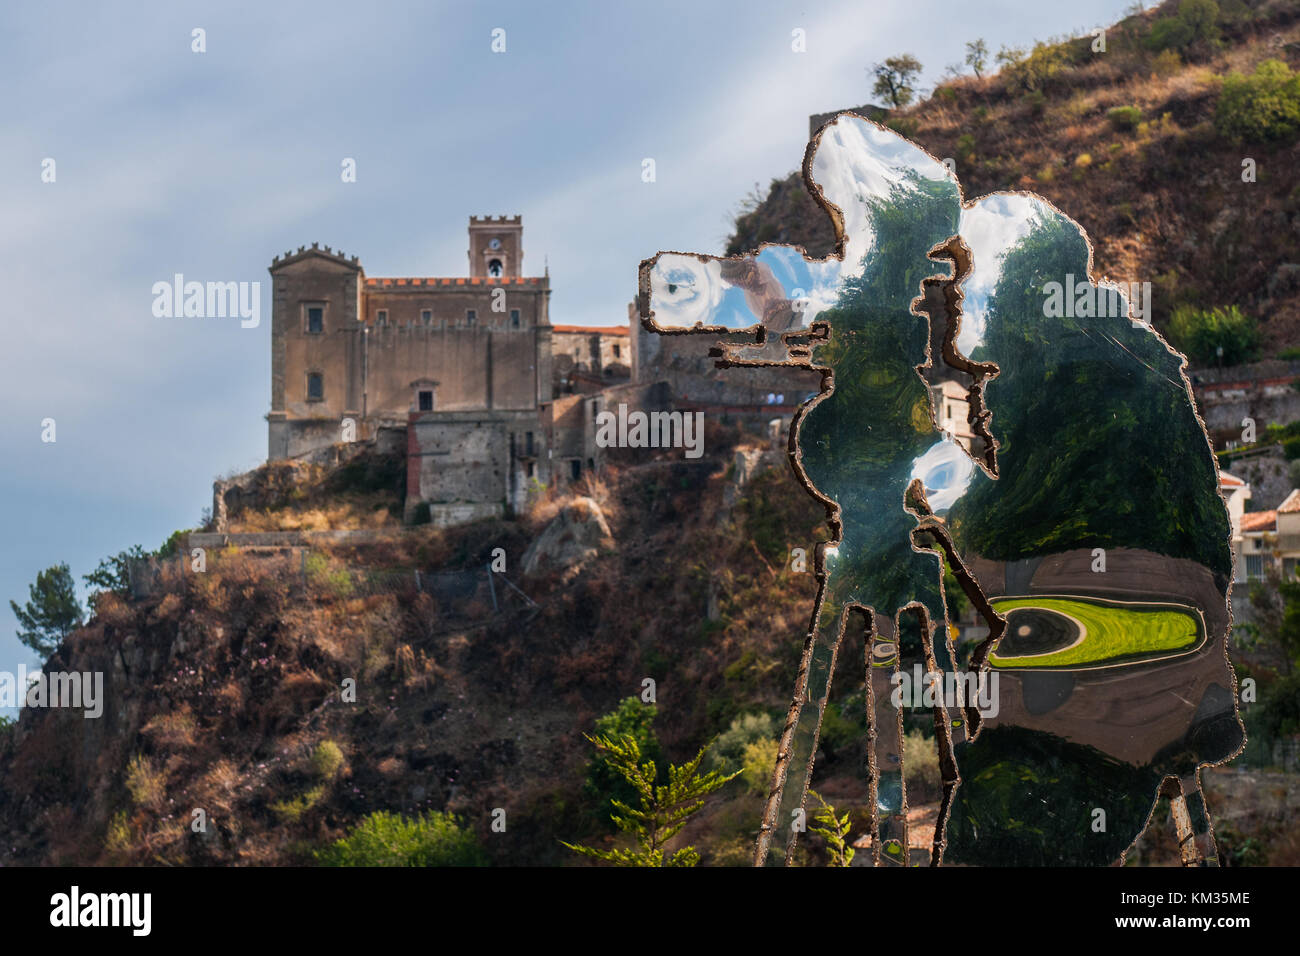 The monument dedicated to director Coppola is seen in the village of Savoca, Sicily, Italy. The town was the location for the scenes set in Corleone o Stock Photo